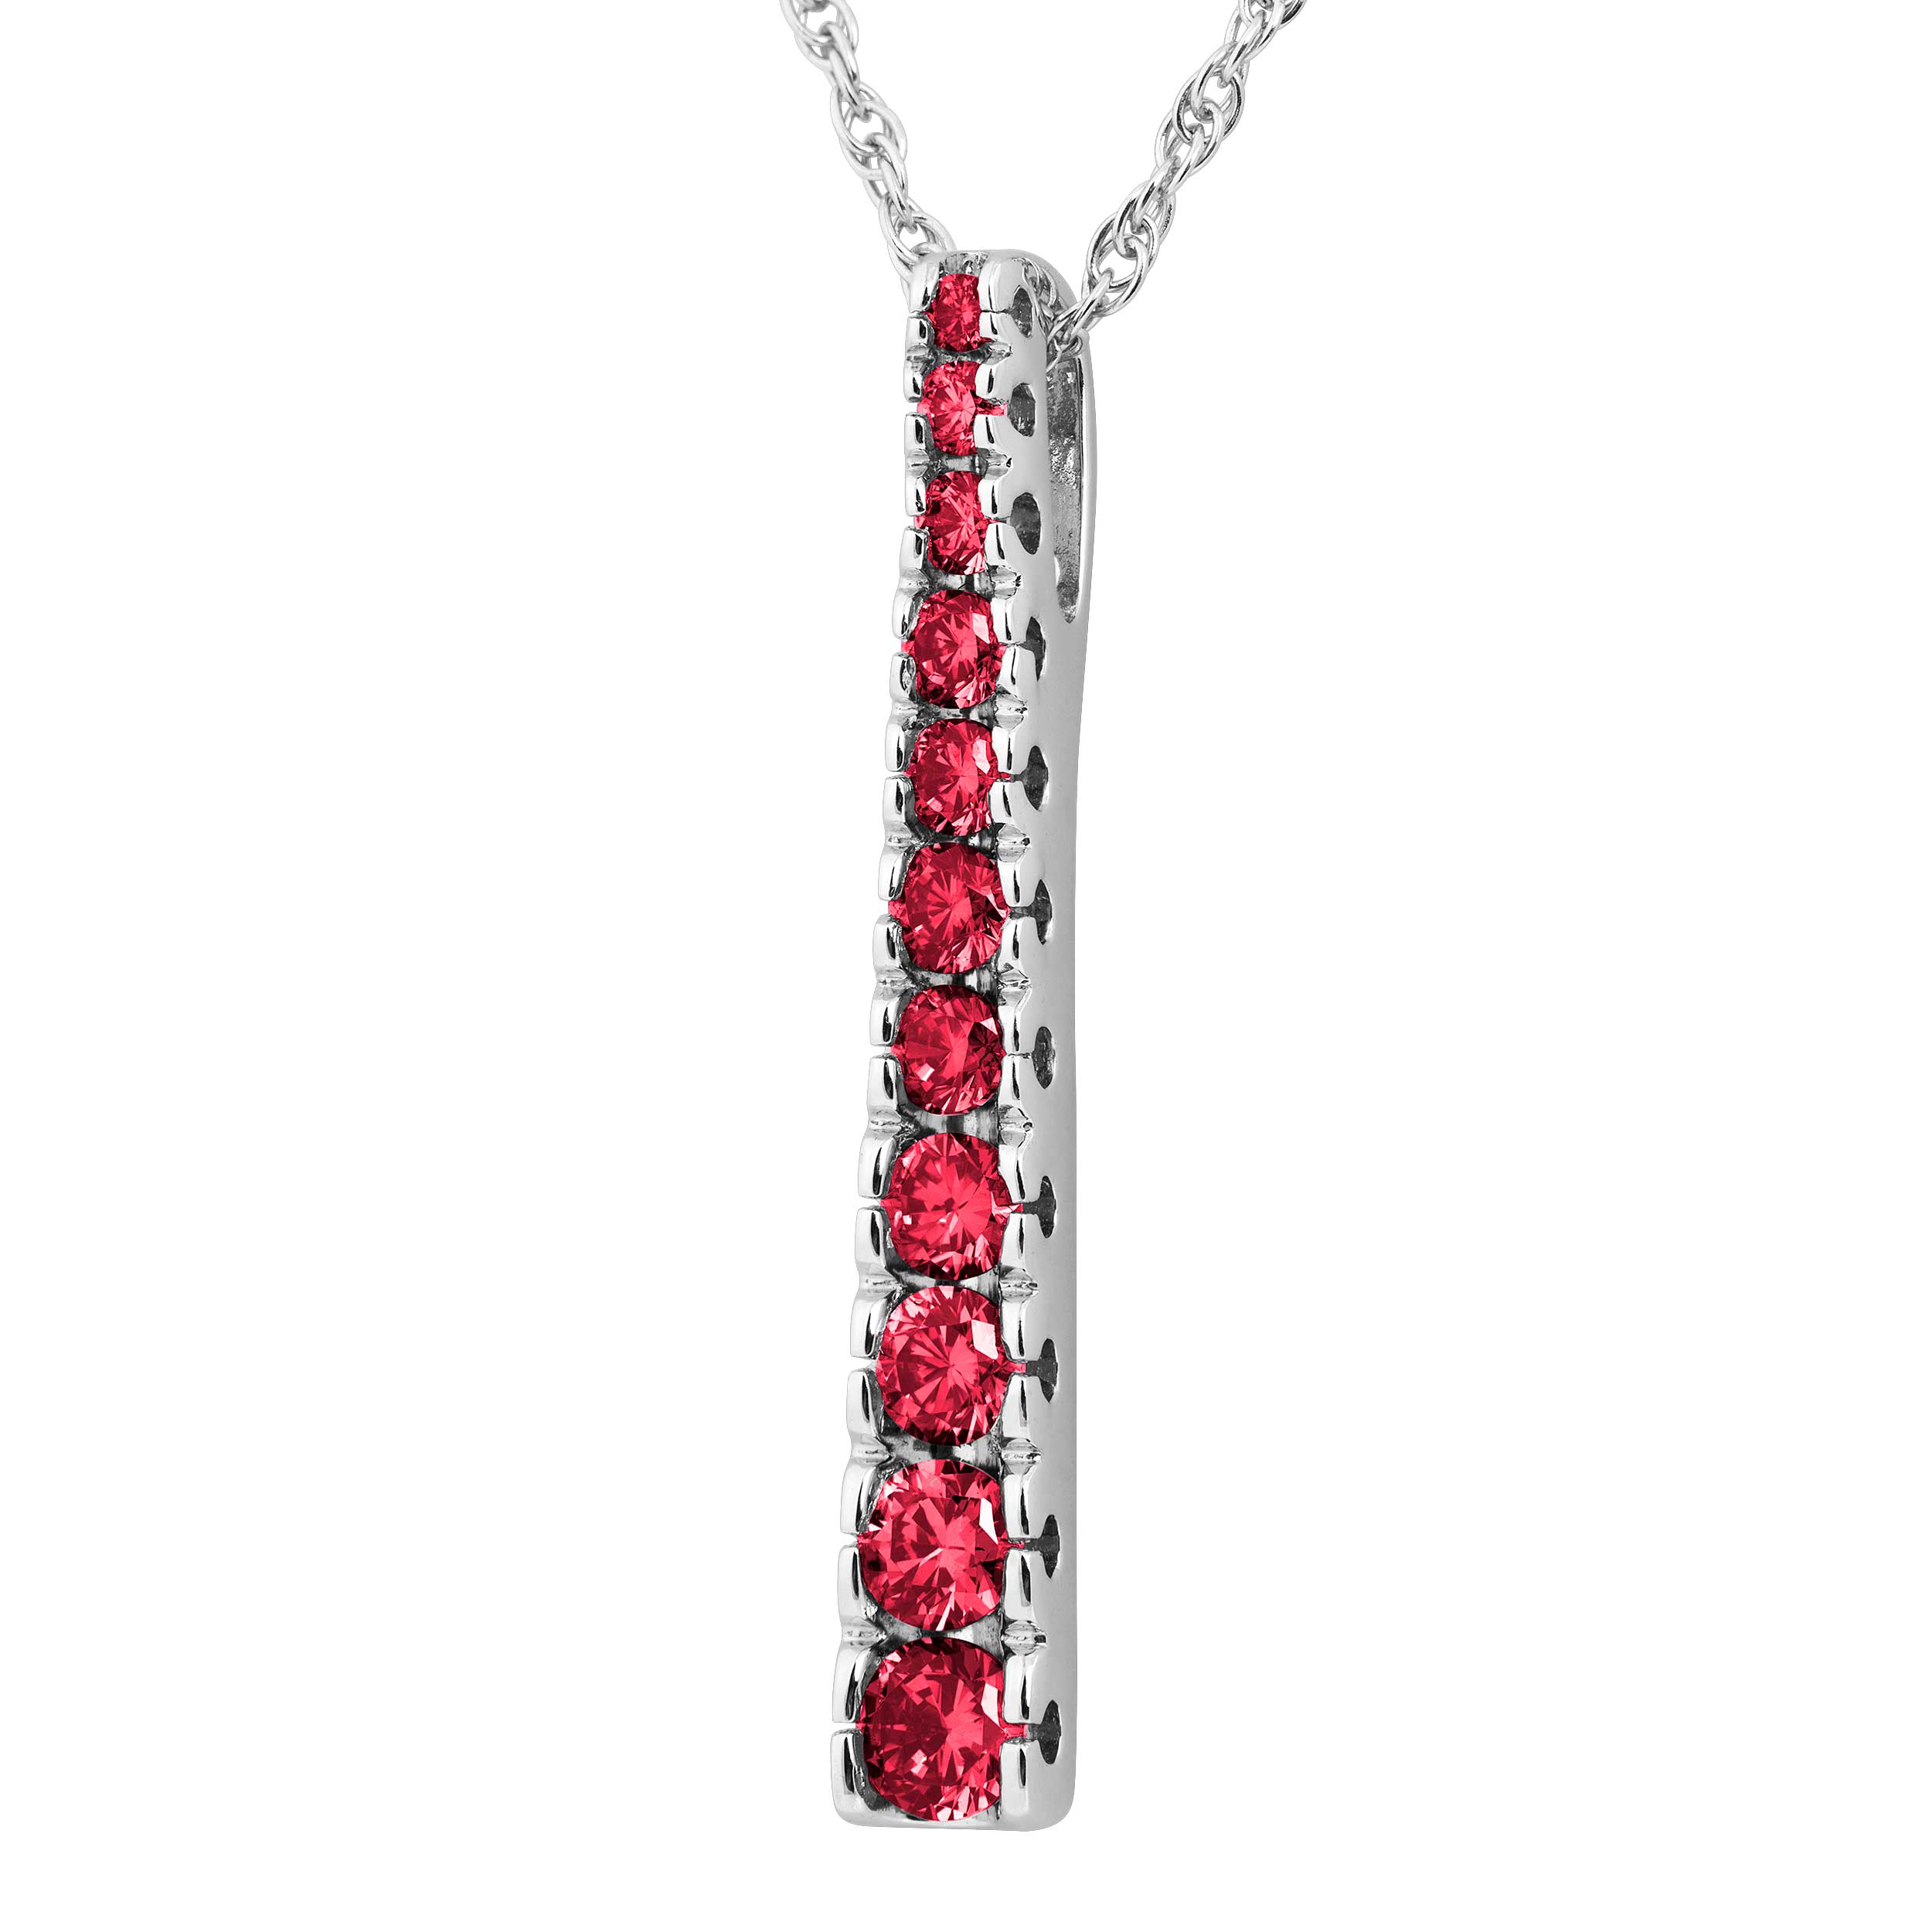  Created Ruby Gradual Pendant Necklace, Rhodium Plated Sterling Silver